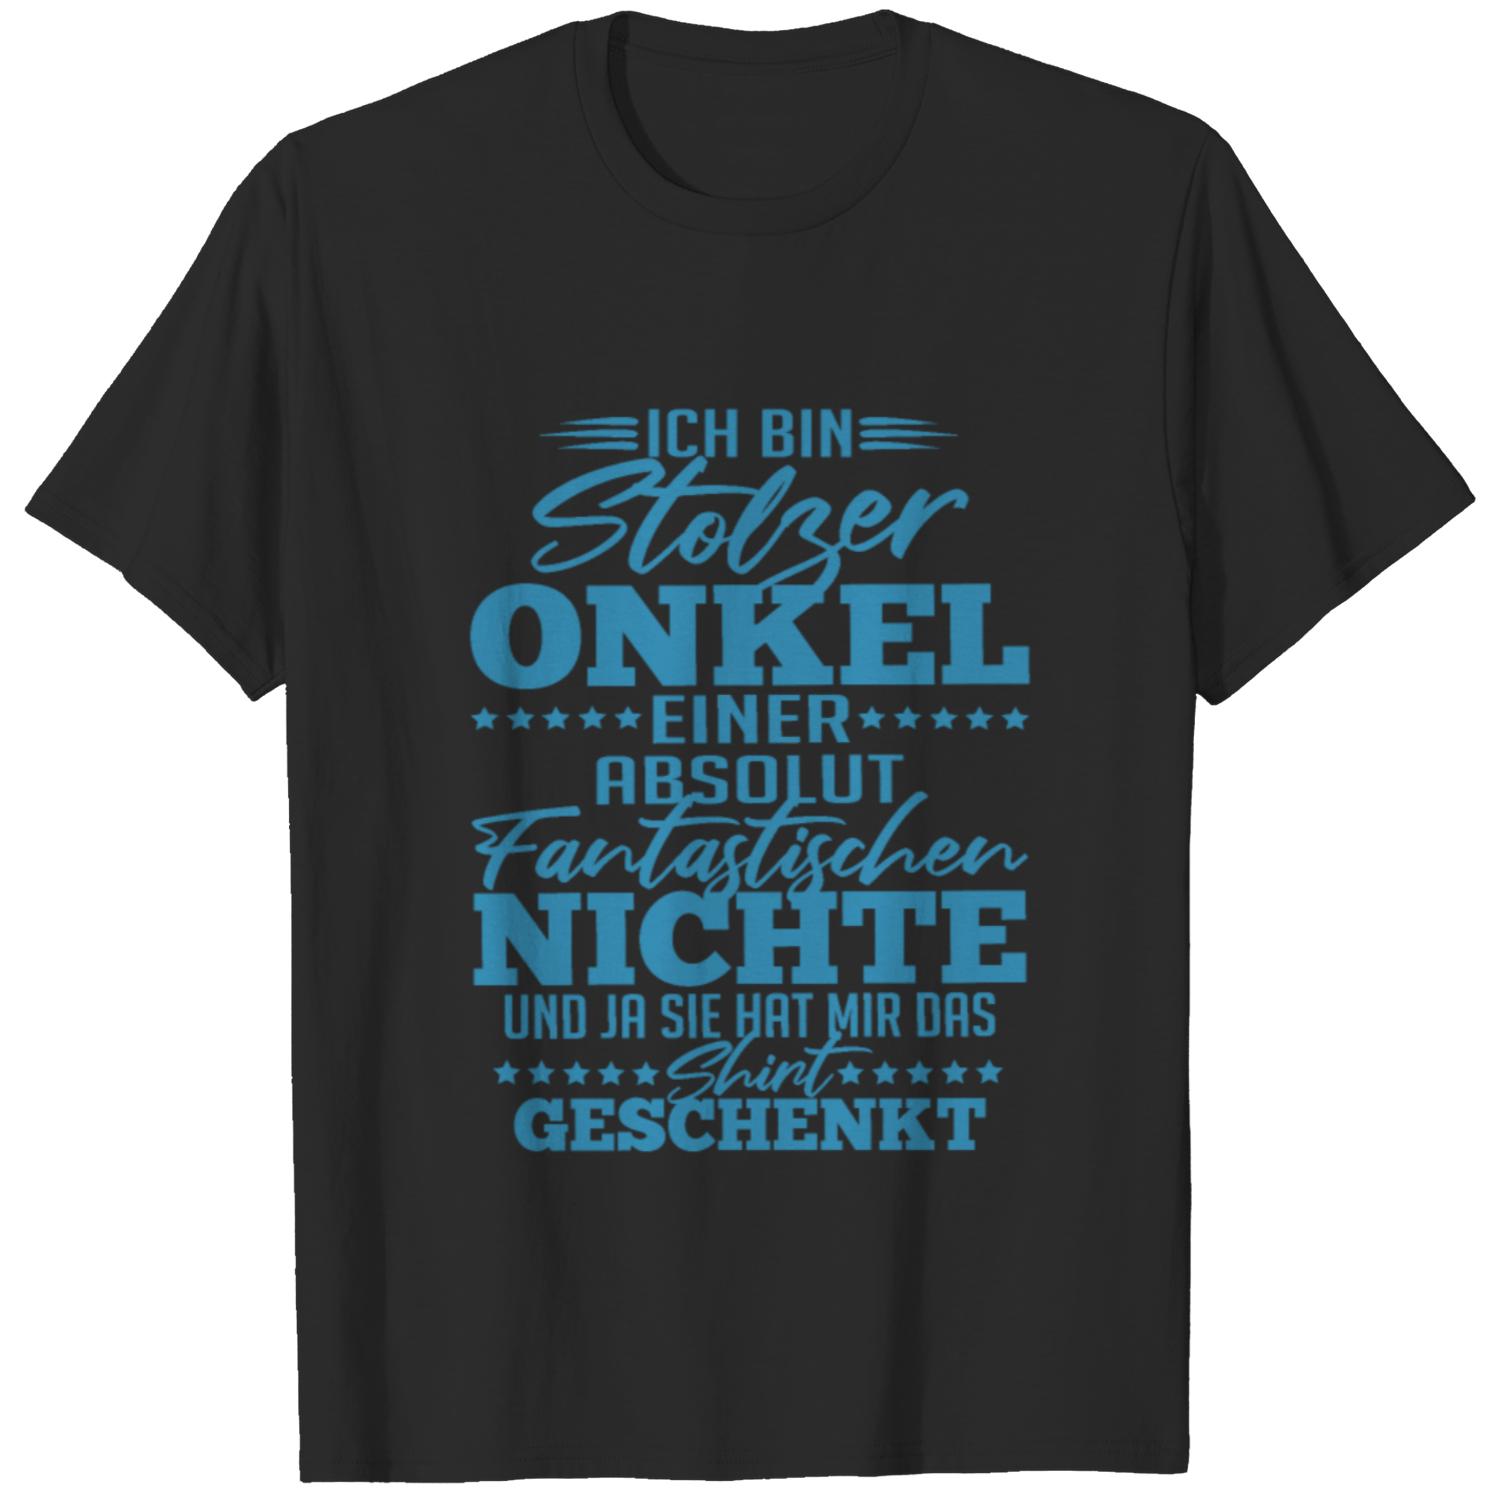 Gift ideas for uncle from niece T-shirt